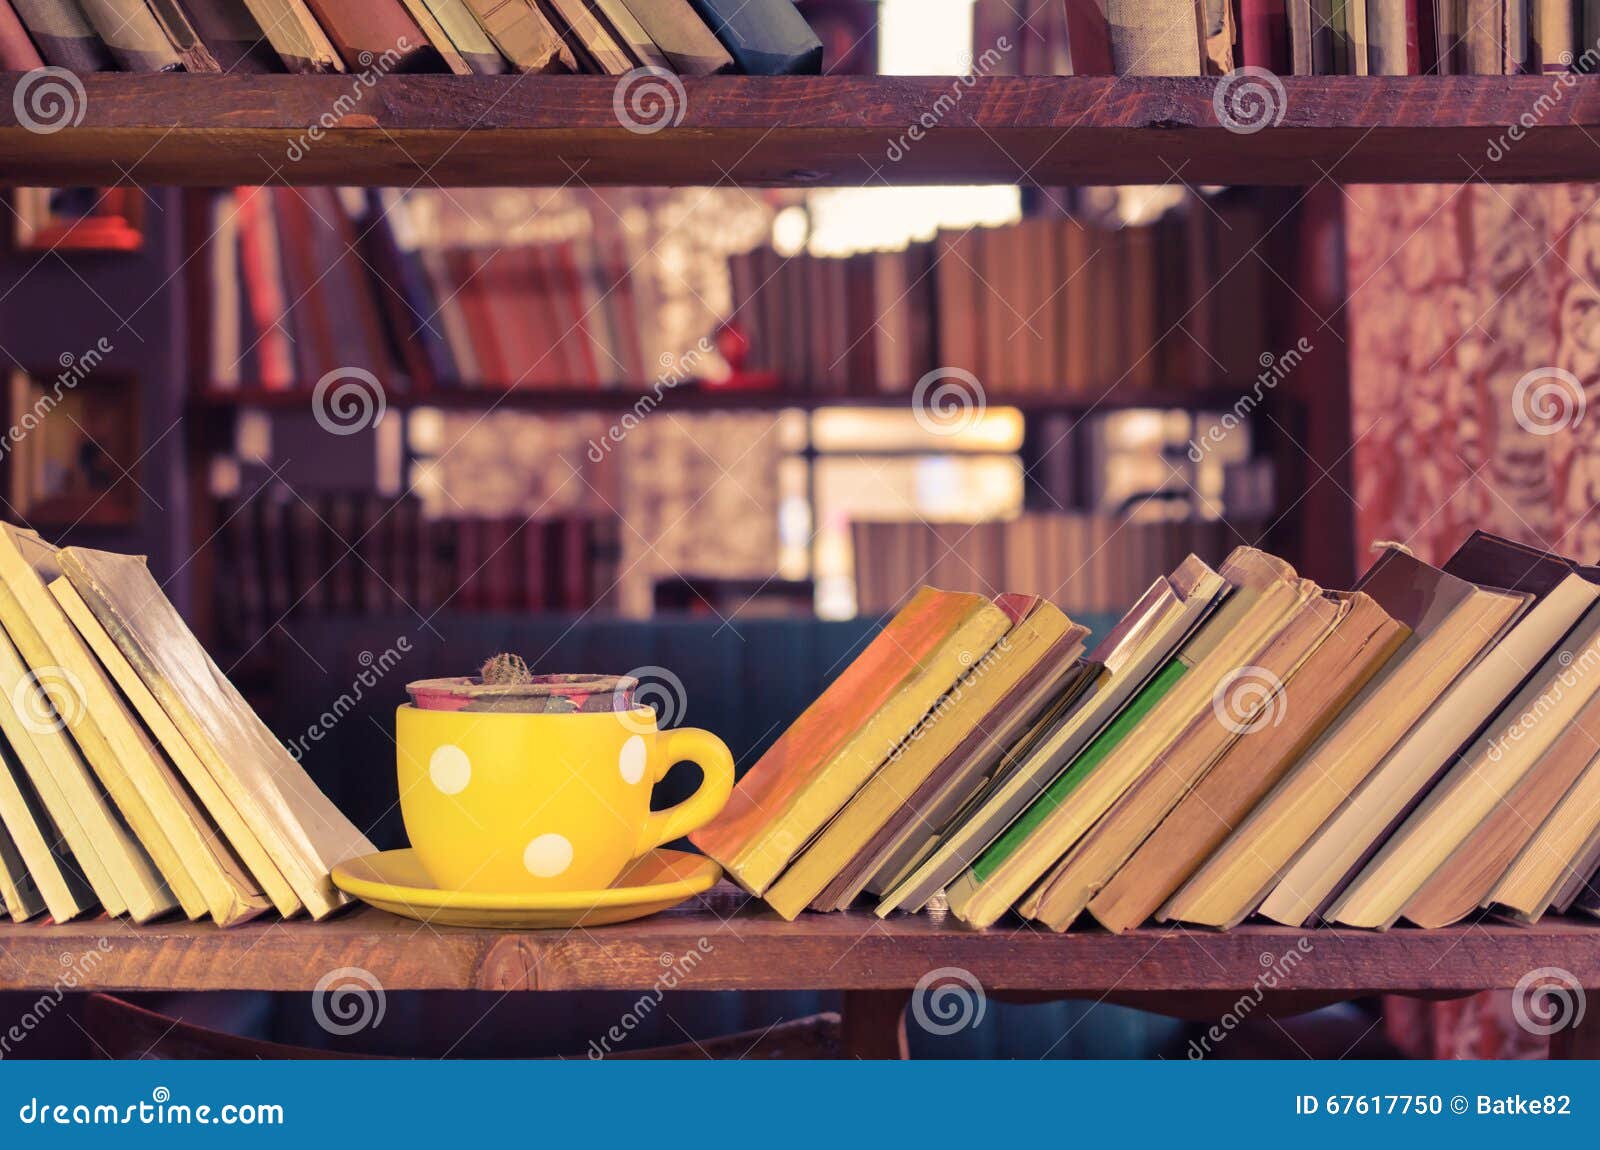 Library Bookshelf And Yellow Cup Old Fashioned Style Stock Photo